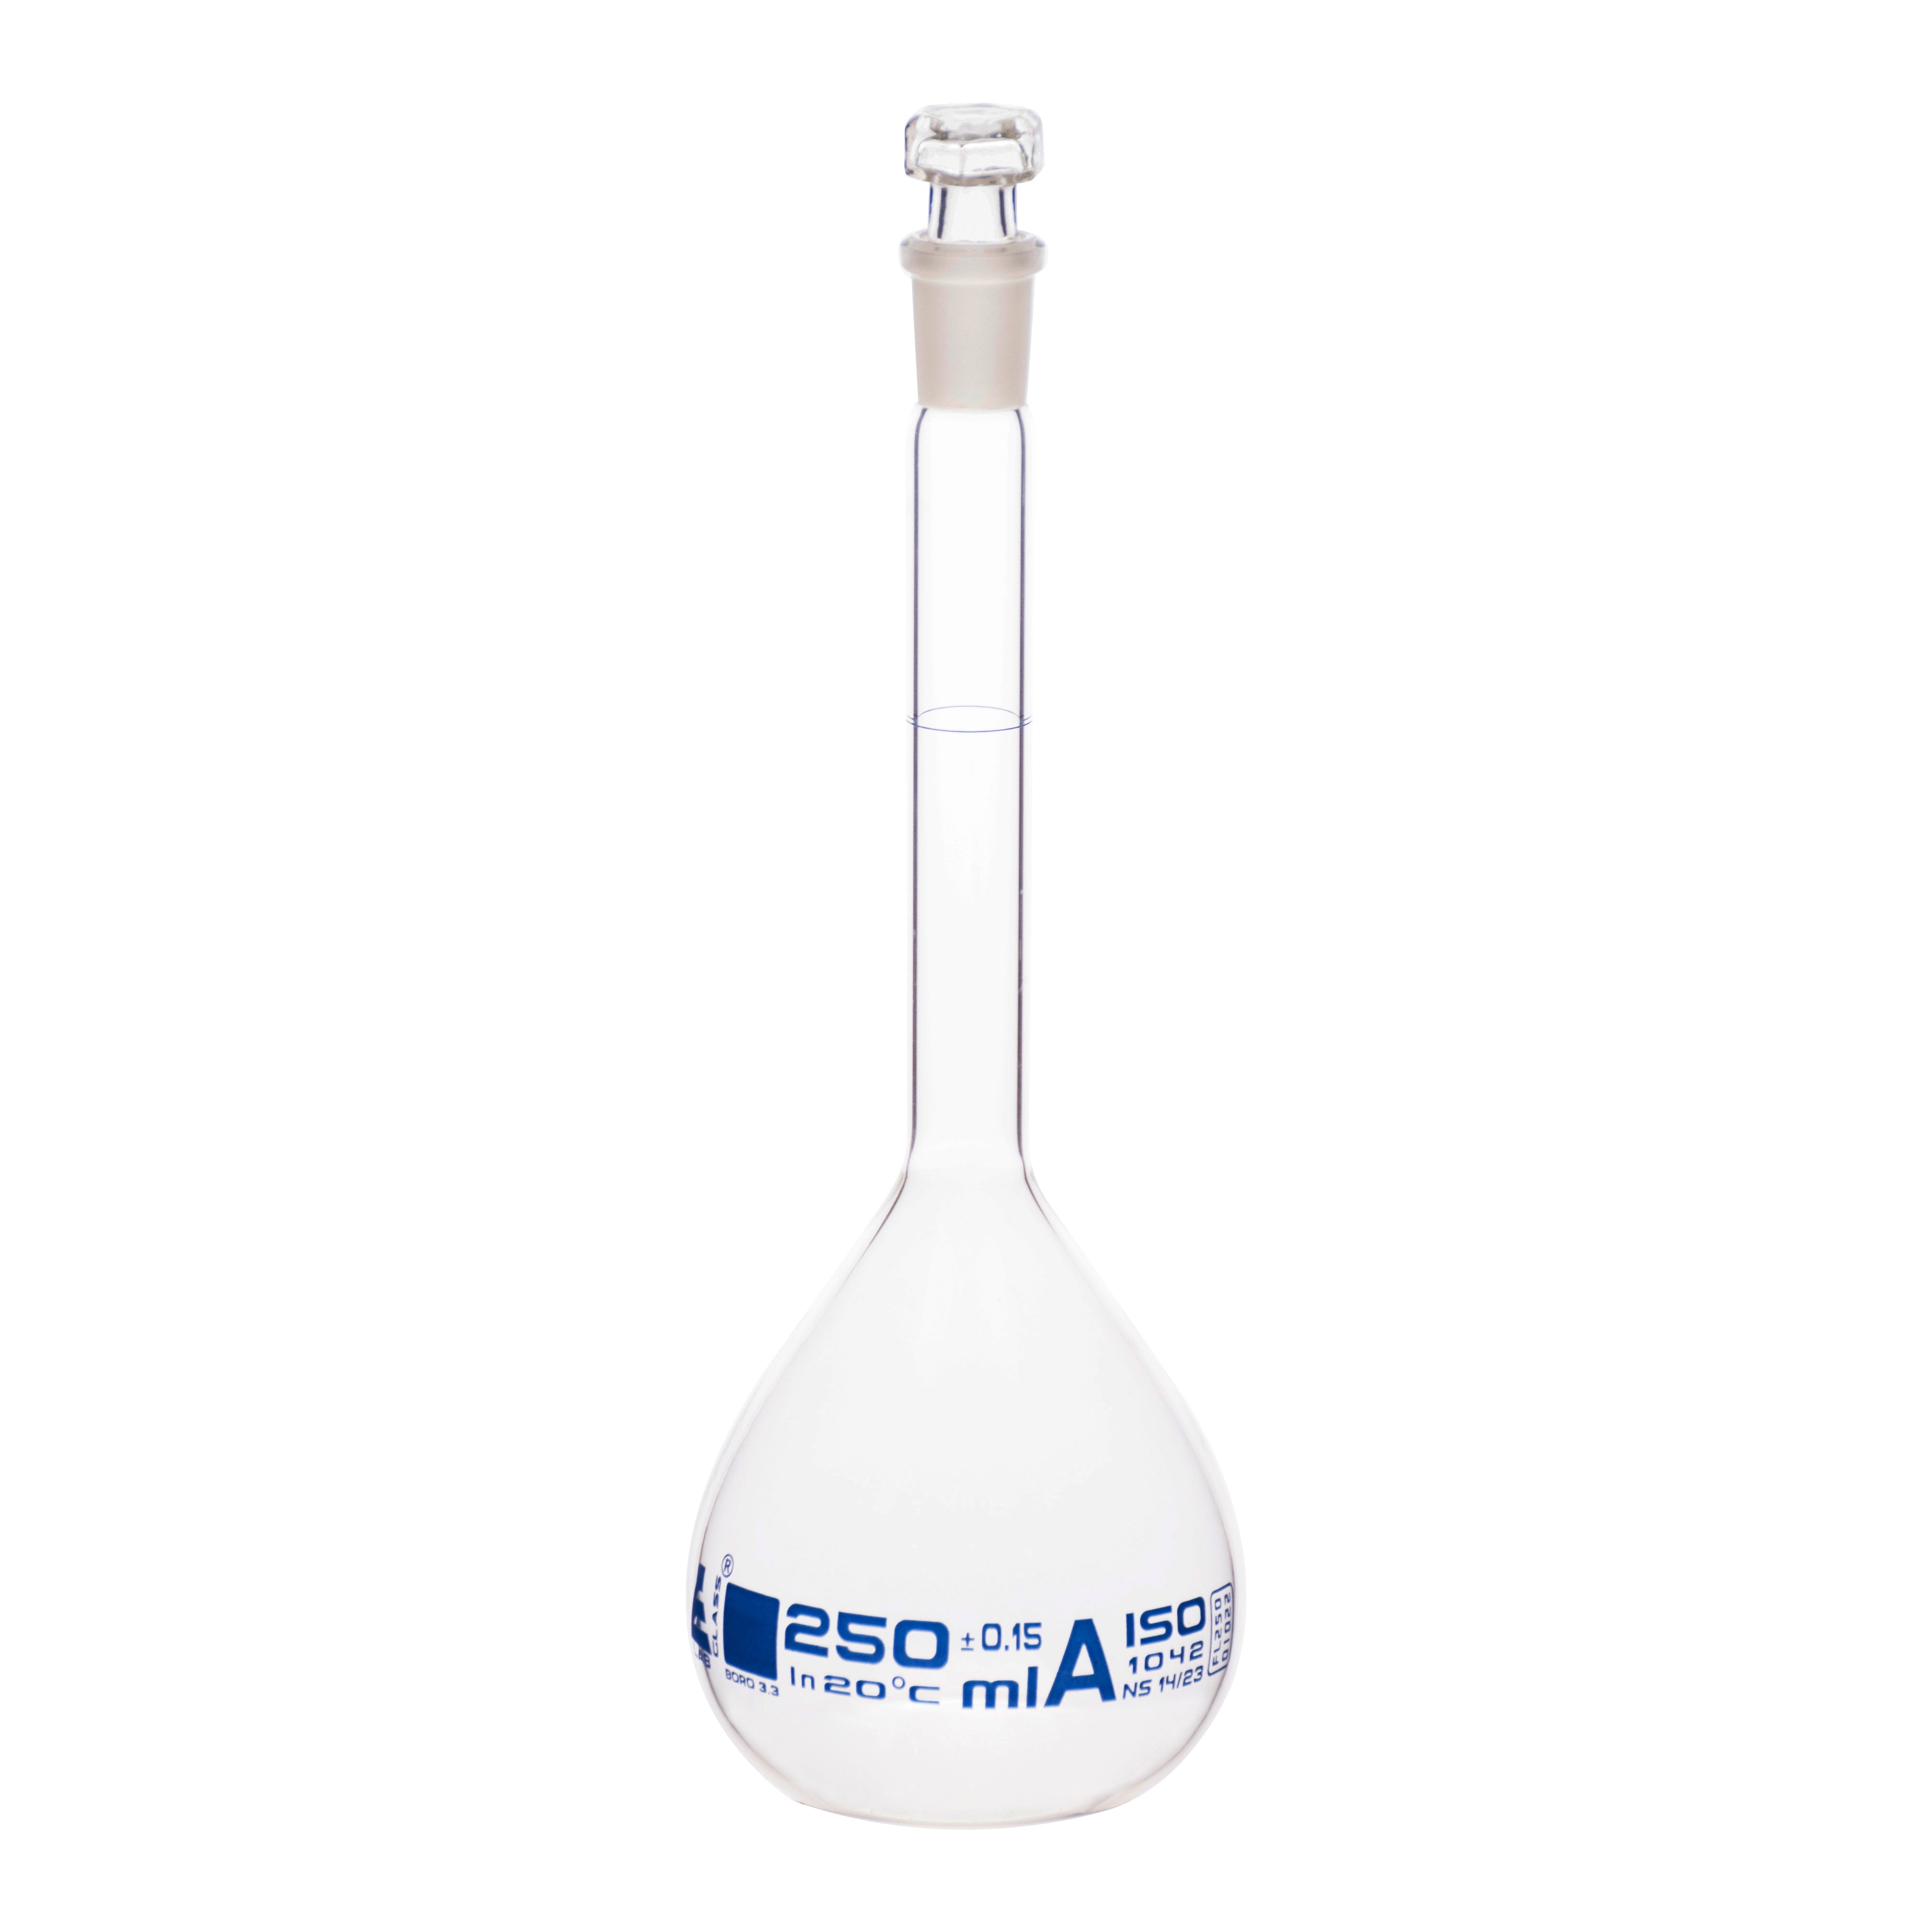 Borosilicate Volumetric Flask with Hollow Glass Stopper, 250ml, Class A, Blue Print, Autoclavable